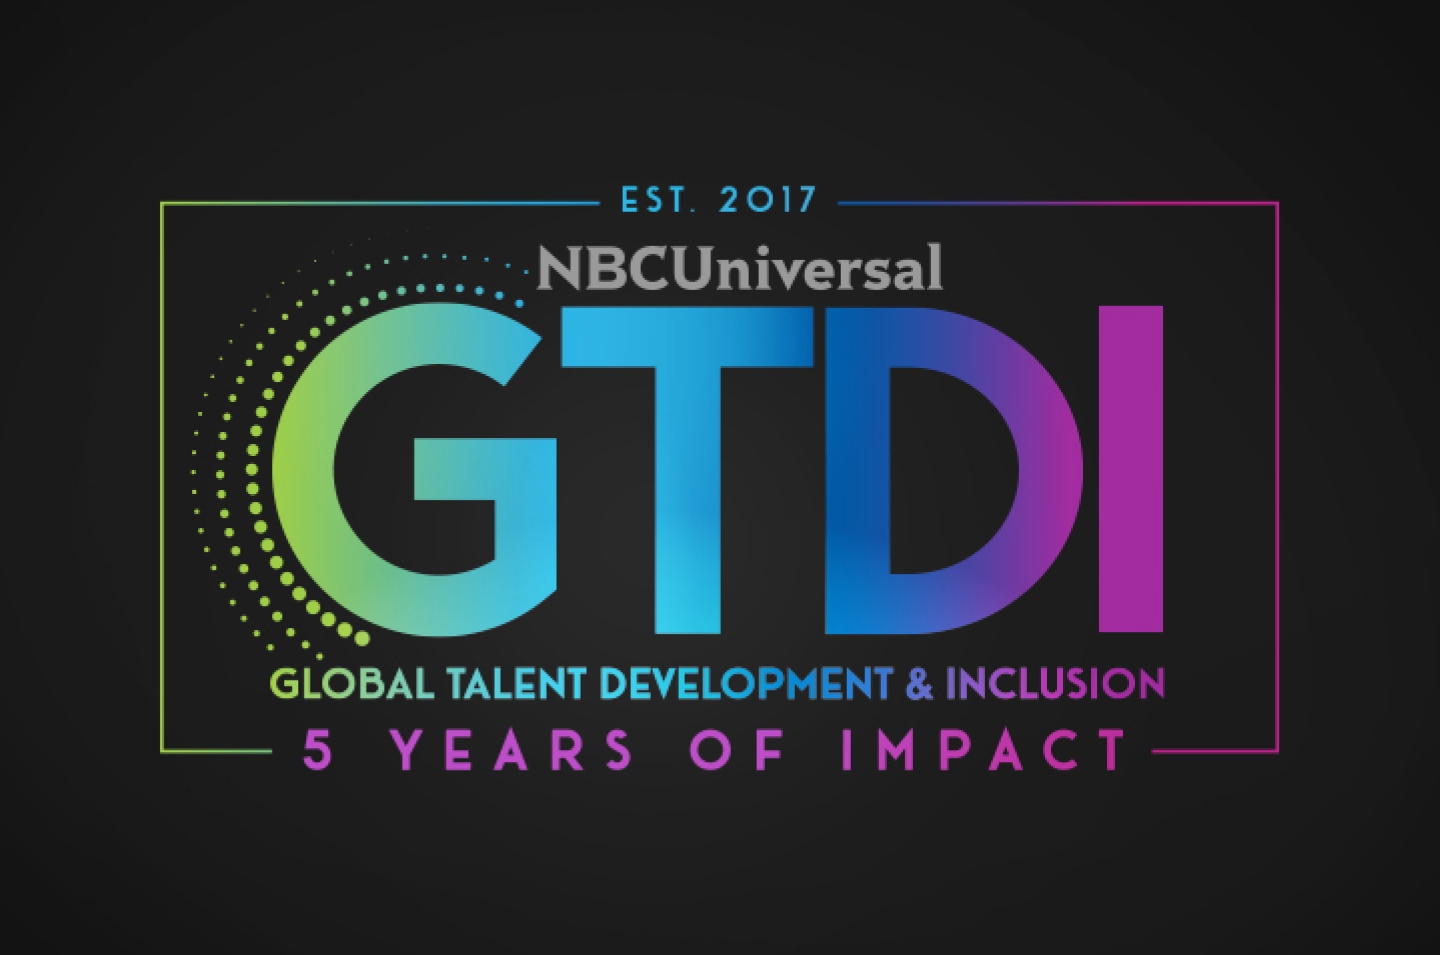 Global Talent Development & Inclusion, GTDI's Logo. Celebrating it's 5 year anniversary it includes the tag line '5 years of impact' and established 2017.